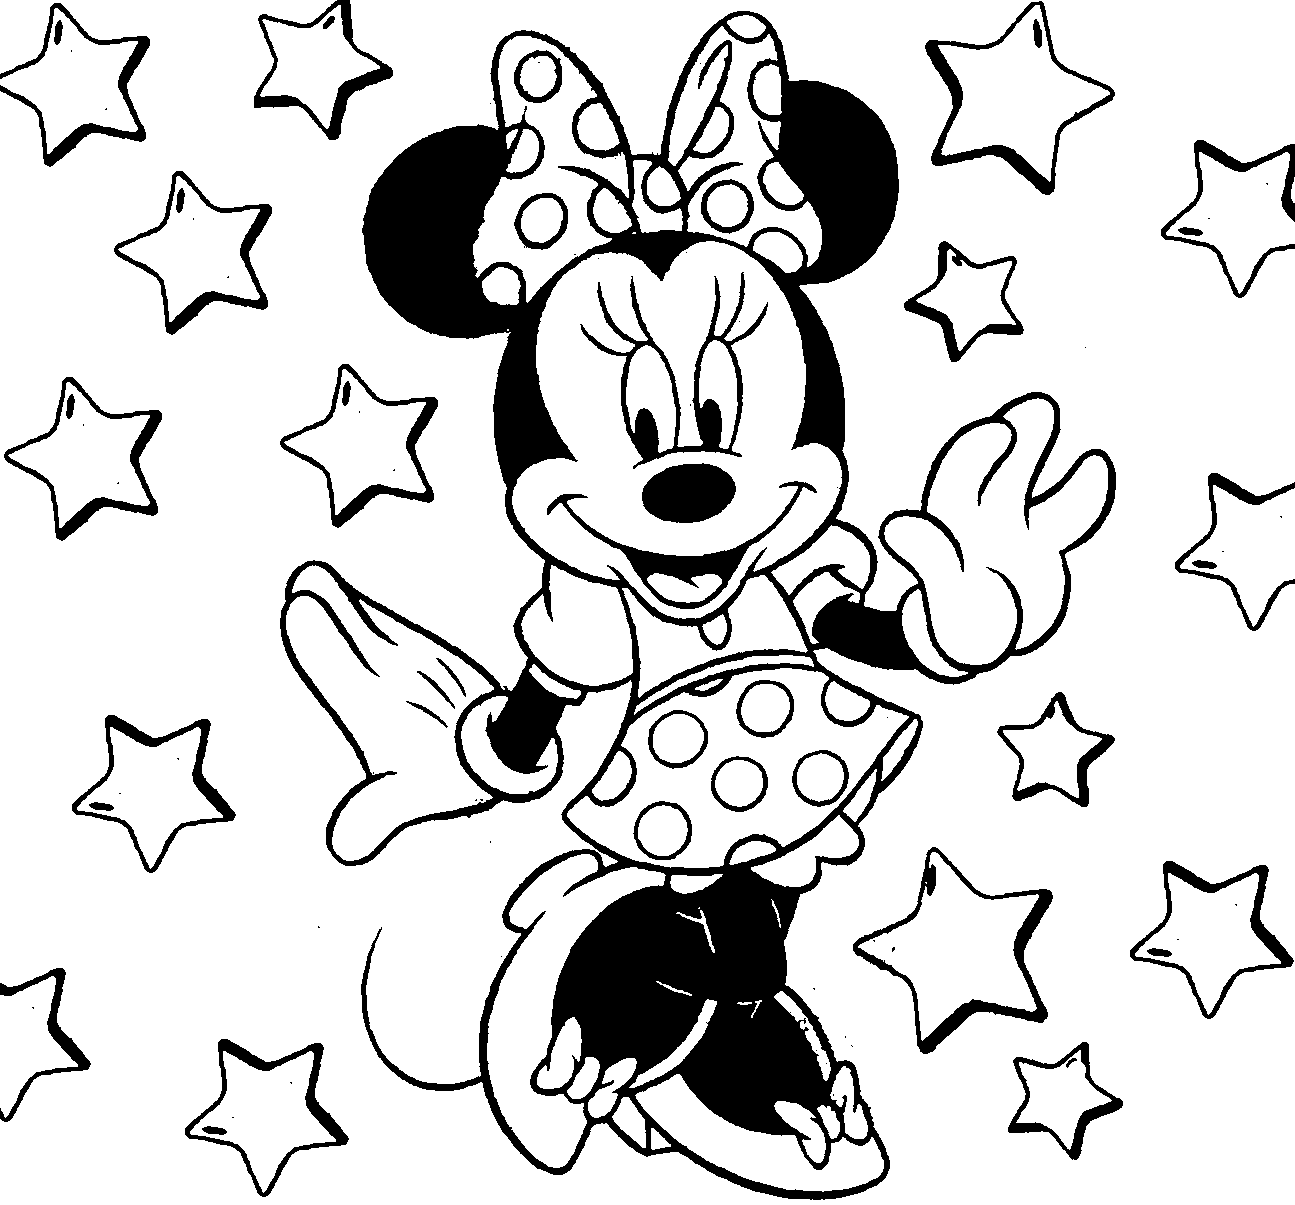 Beautiful Minnie Mouse Disney Cartoon For Kid Coloring Drawing Free wallpaper